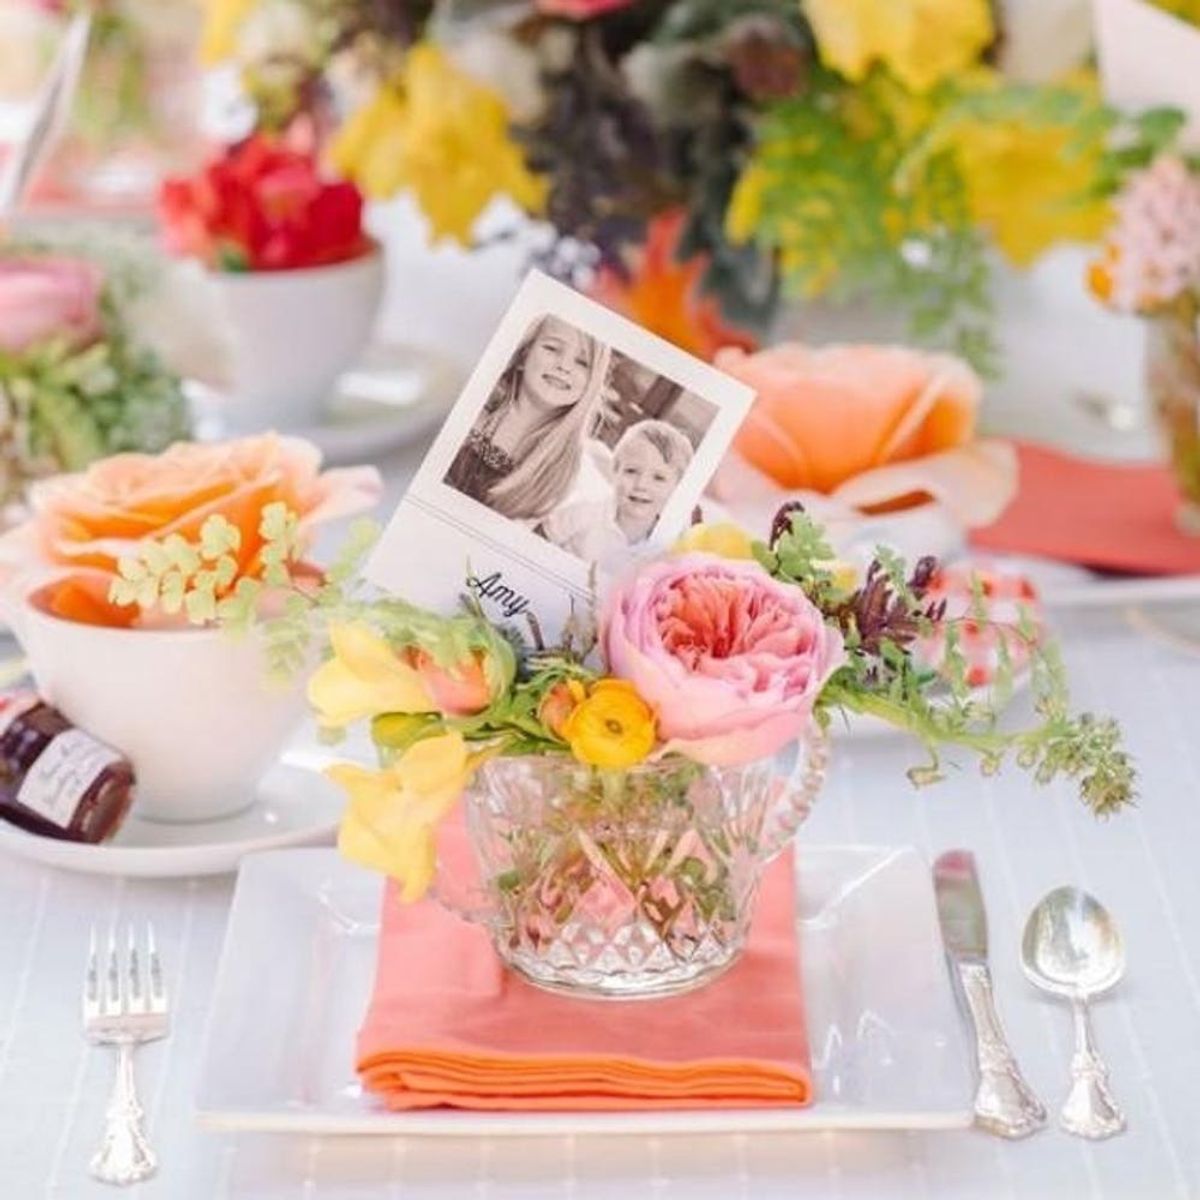 Set Your Mother’s Day Brunch in Style With These 12 Tablescapes